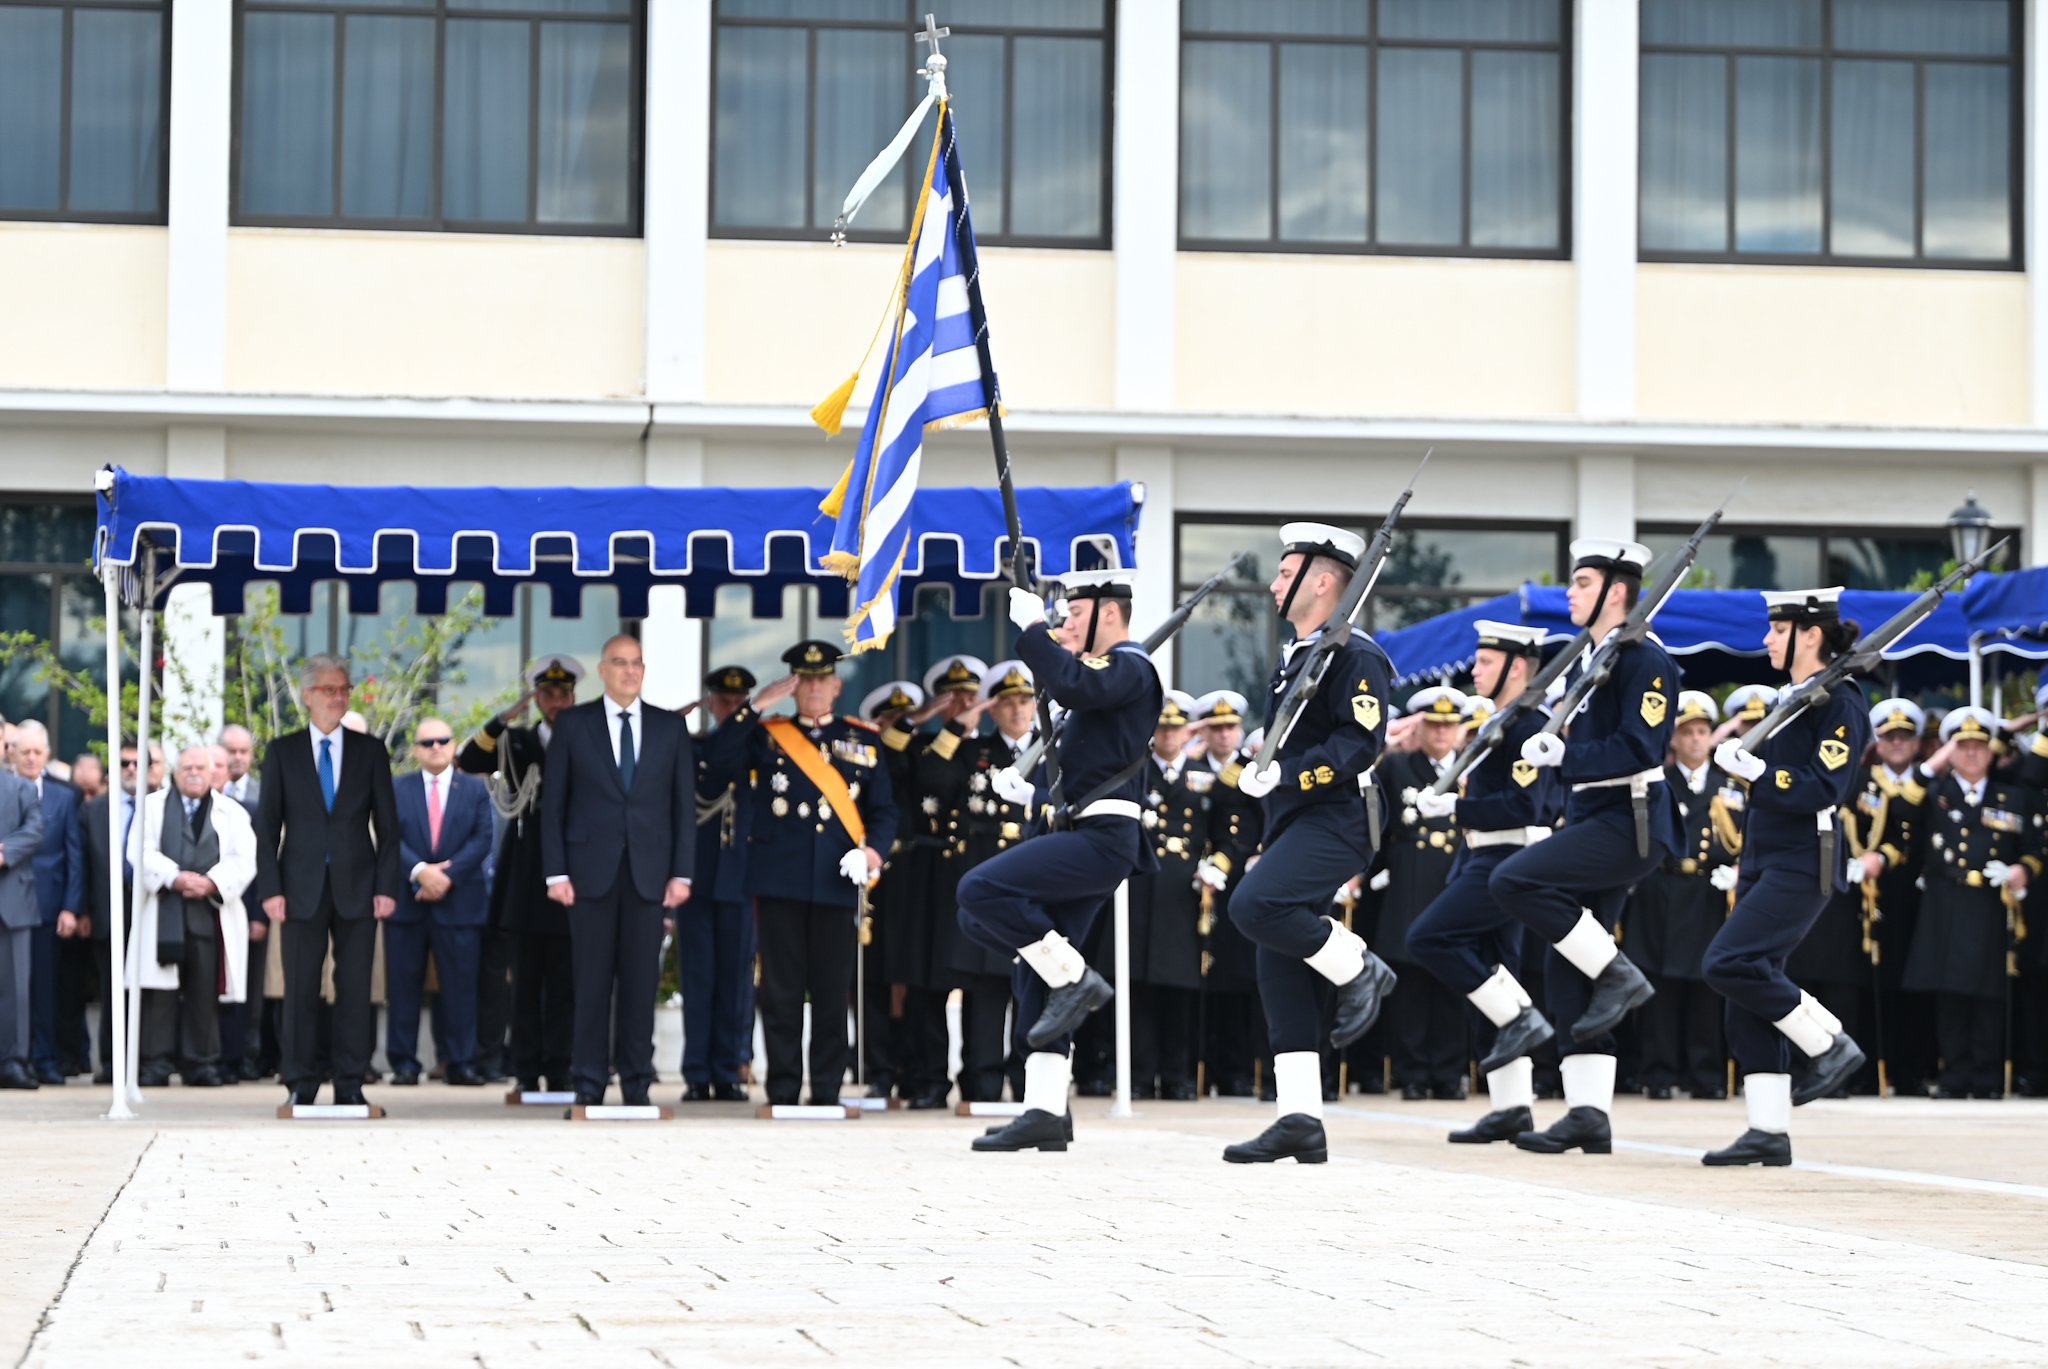  The Feast Day Celebration at the Hellenic Naval Academy of St. Nicholas, the Patron Saint and Protector of the Hellenic Navy.  